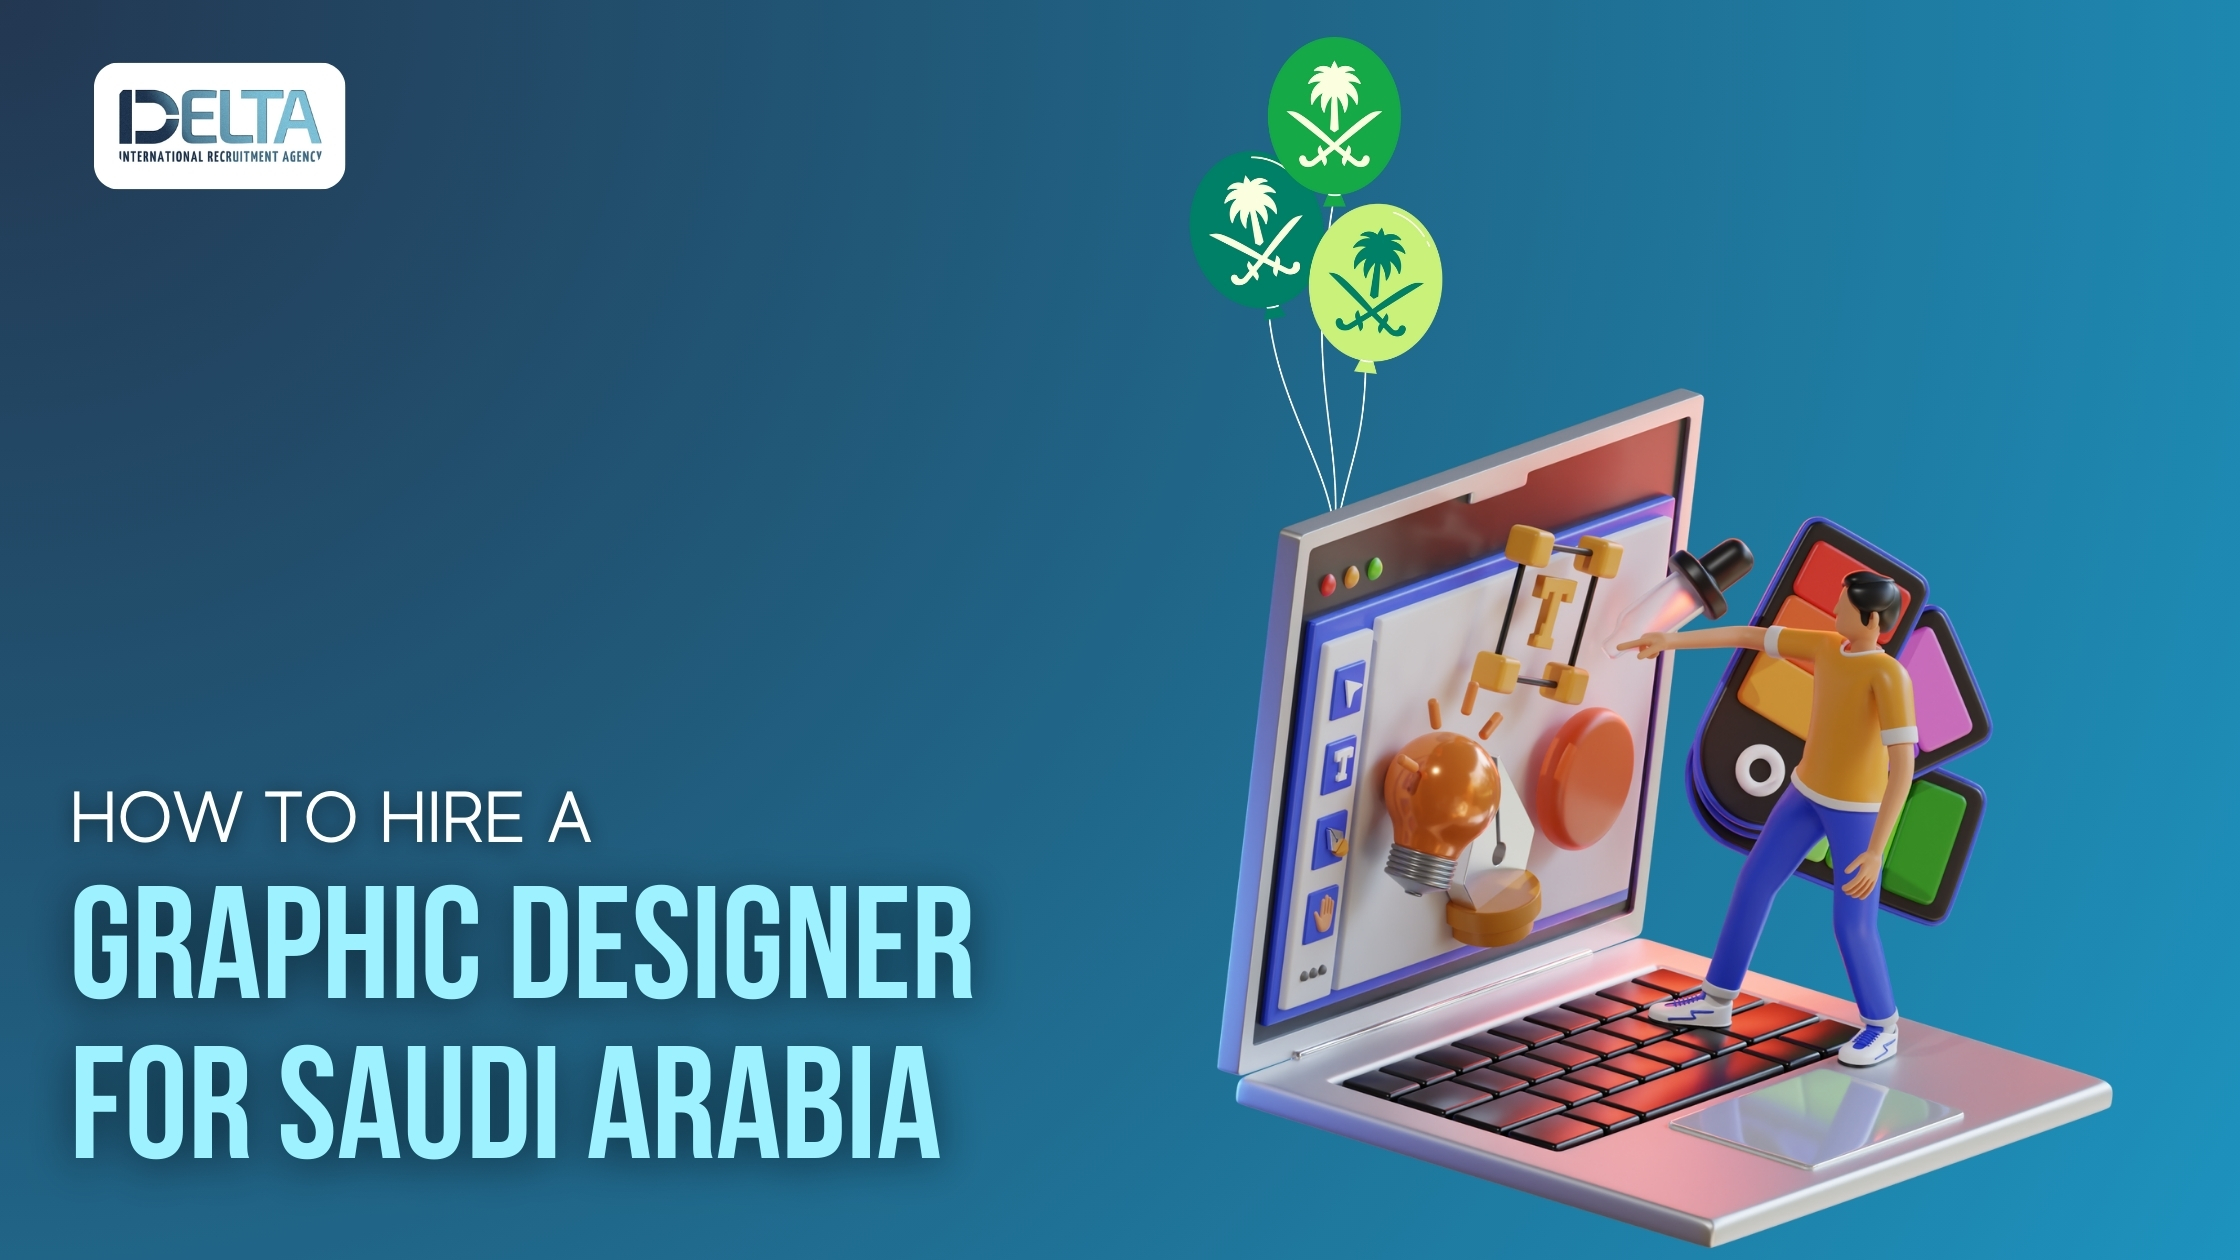 How to Hire a Graphic Designer for Saudi Arabia?